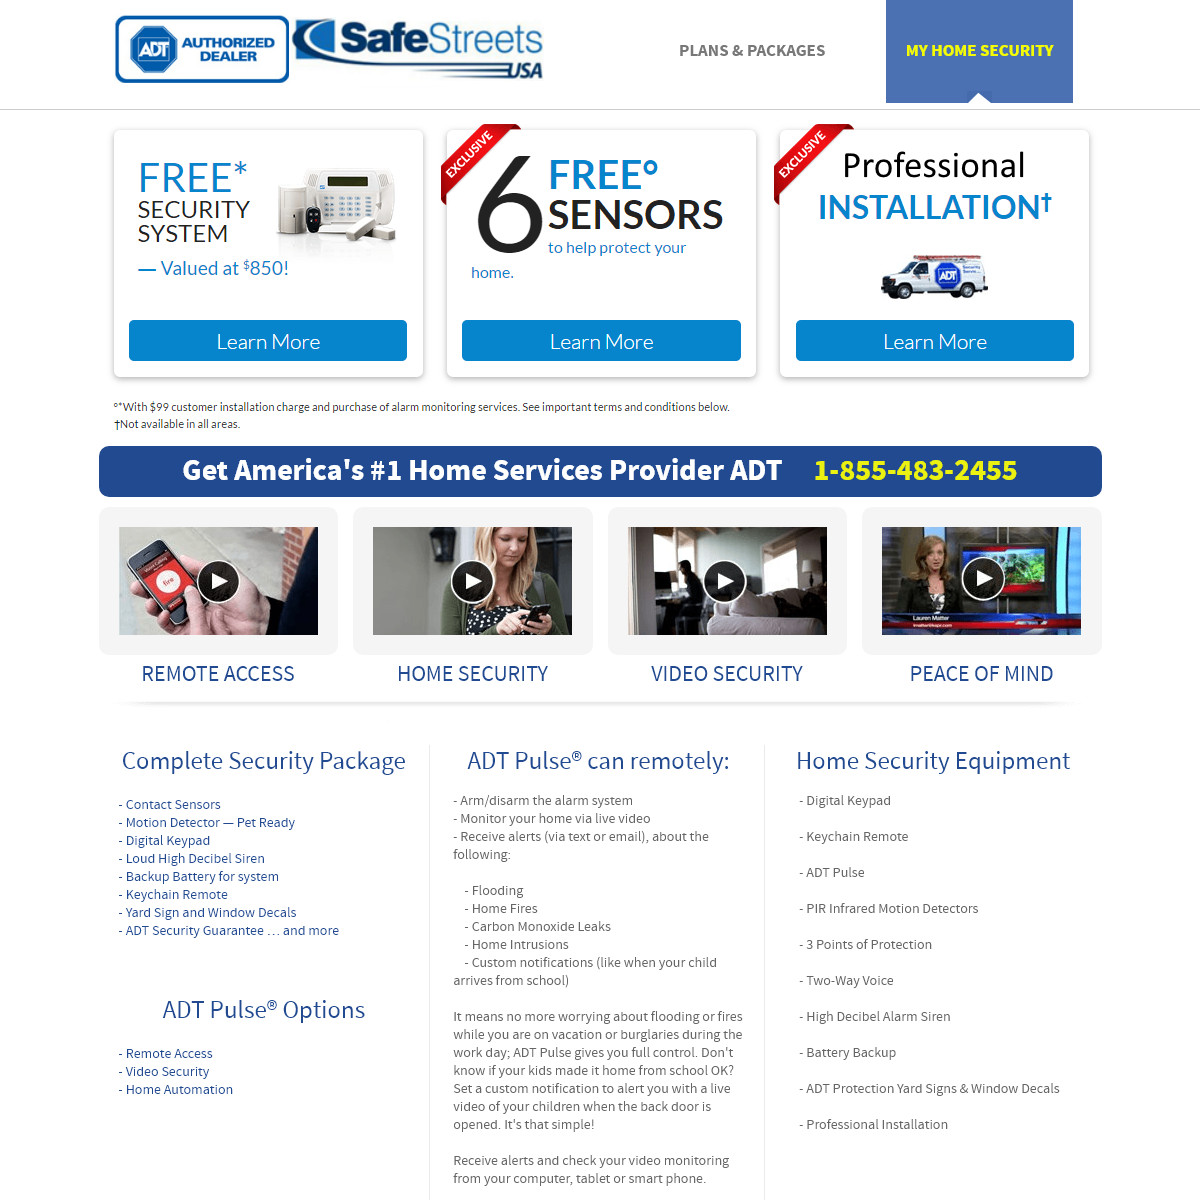 Home Security Systems - My Home Security